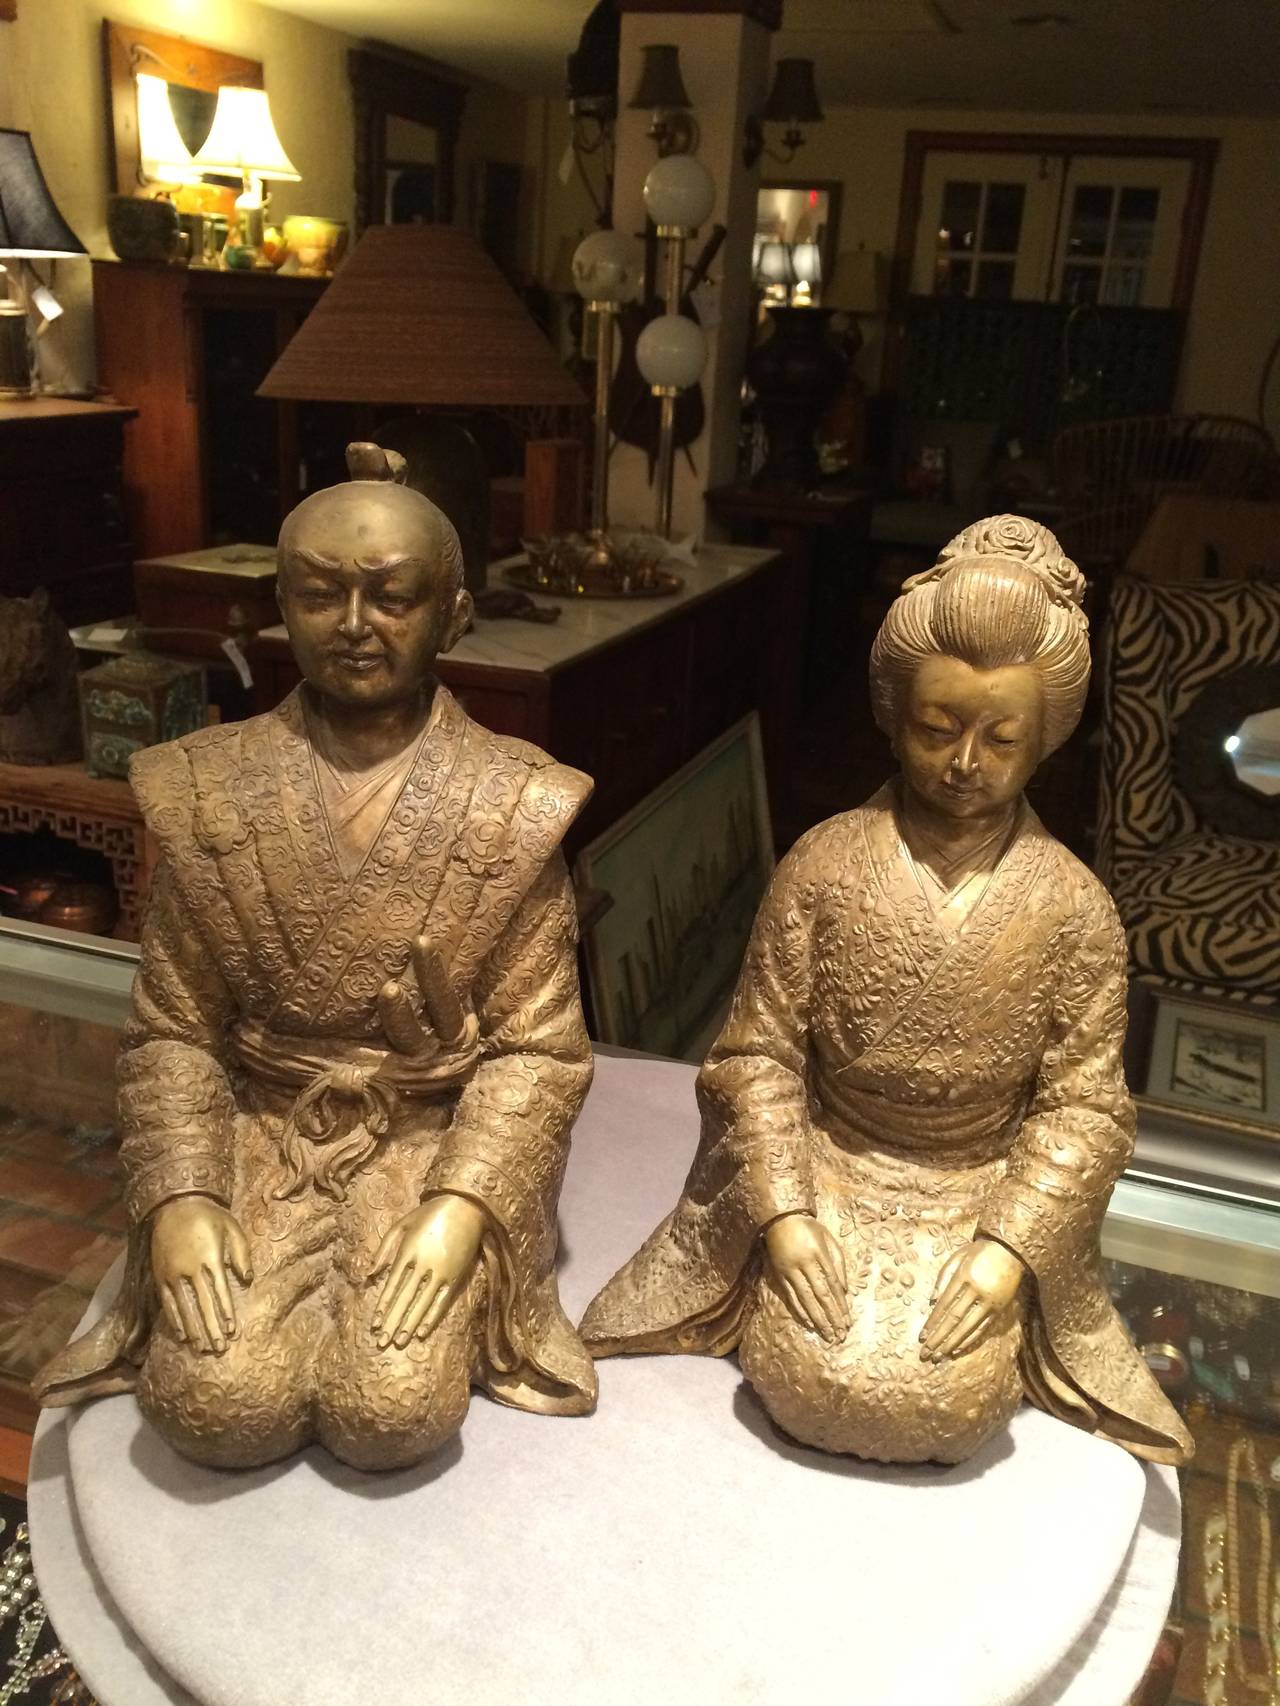 Pair of bronze Asian statues. Highly detailed and beautiful pair.